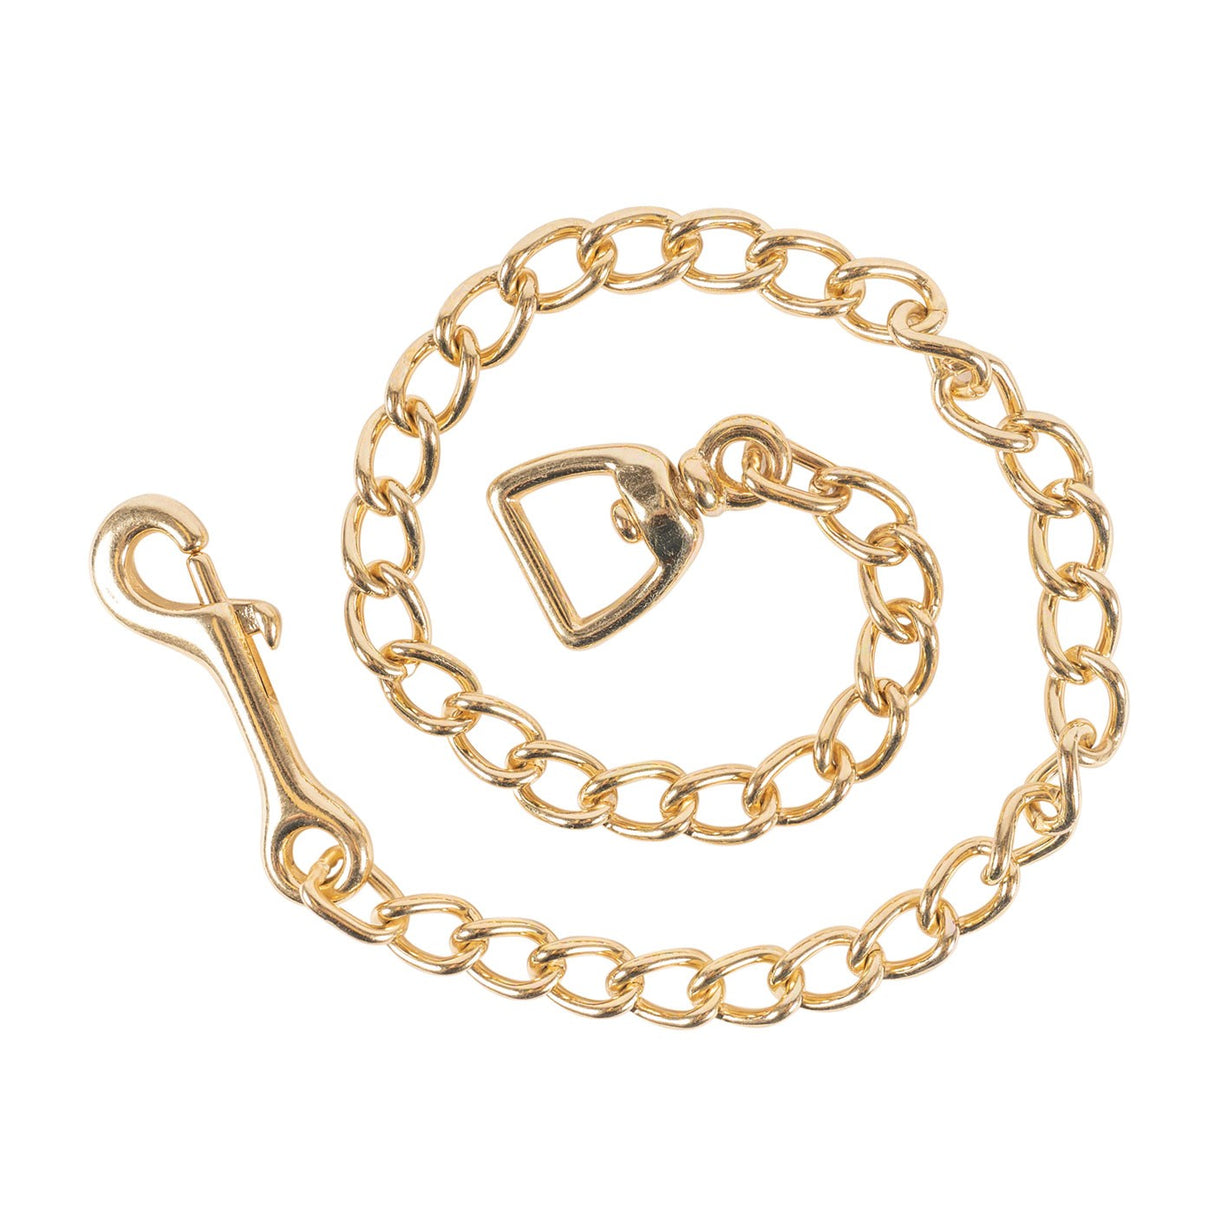 Supra Brass Plated Chain 30 In.